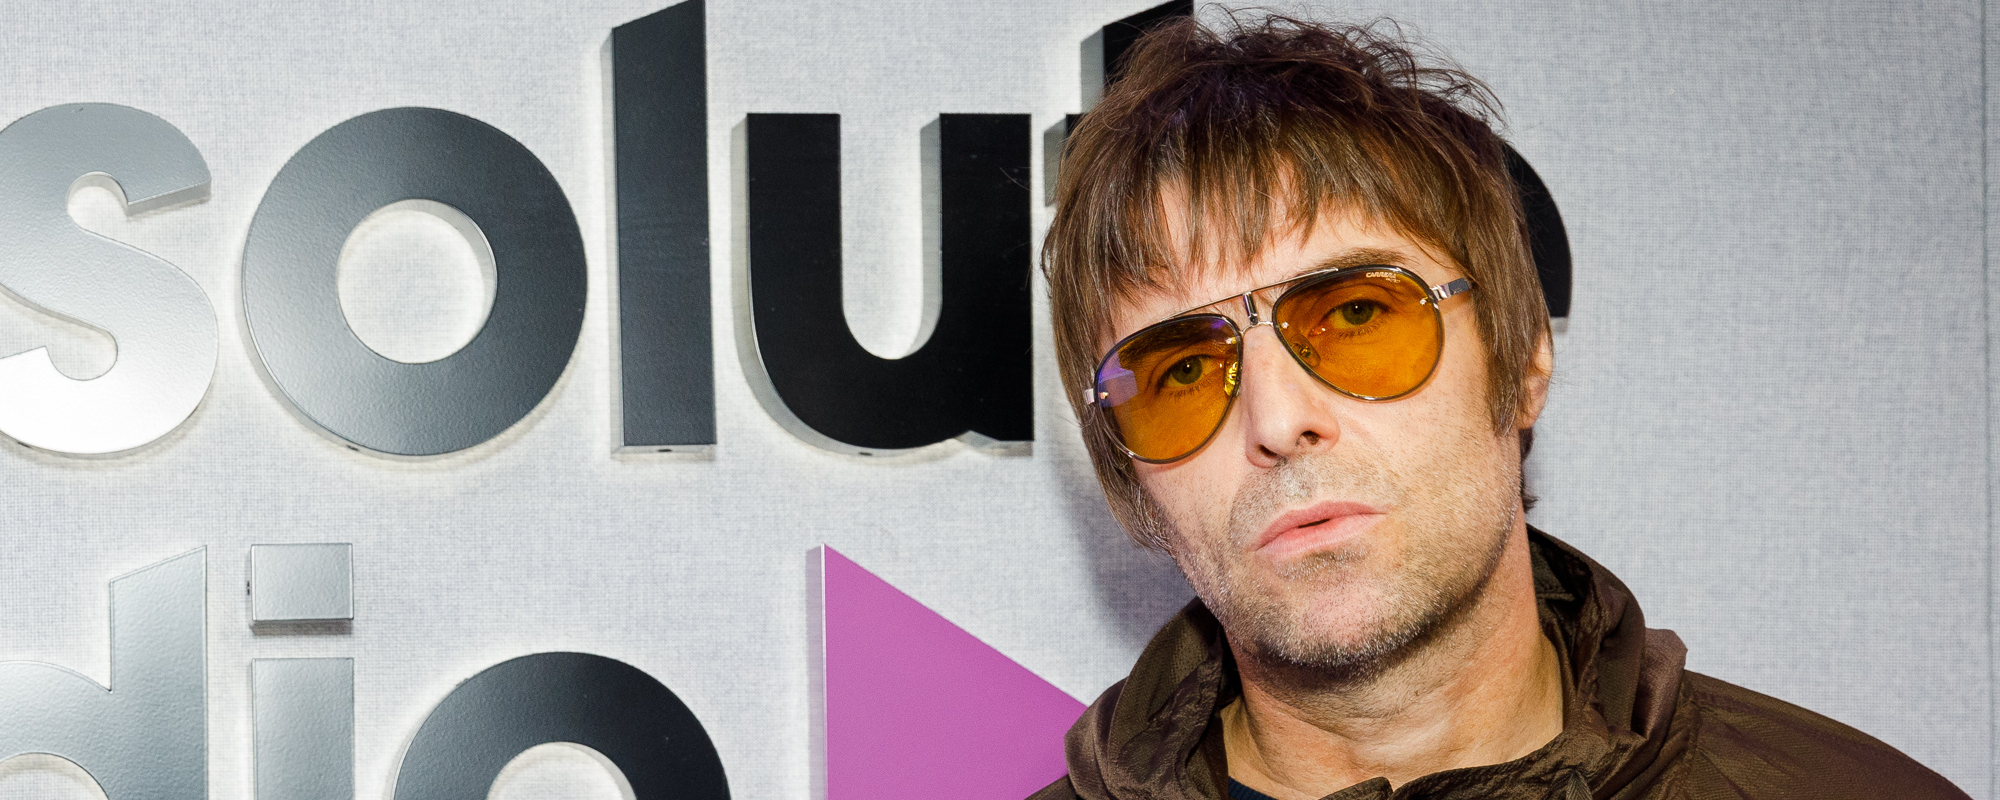 Liam Gallagher Obliterates Rock and Roll Hall of Fame in Expletive-Filled Take After Oasis Nomination